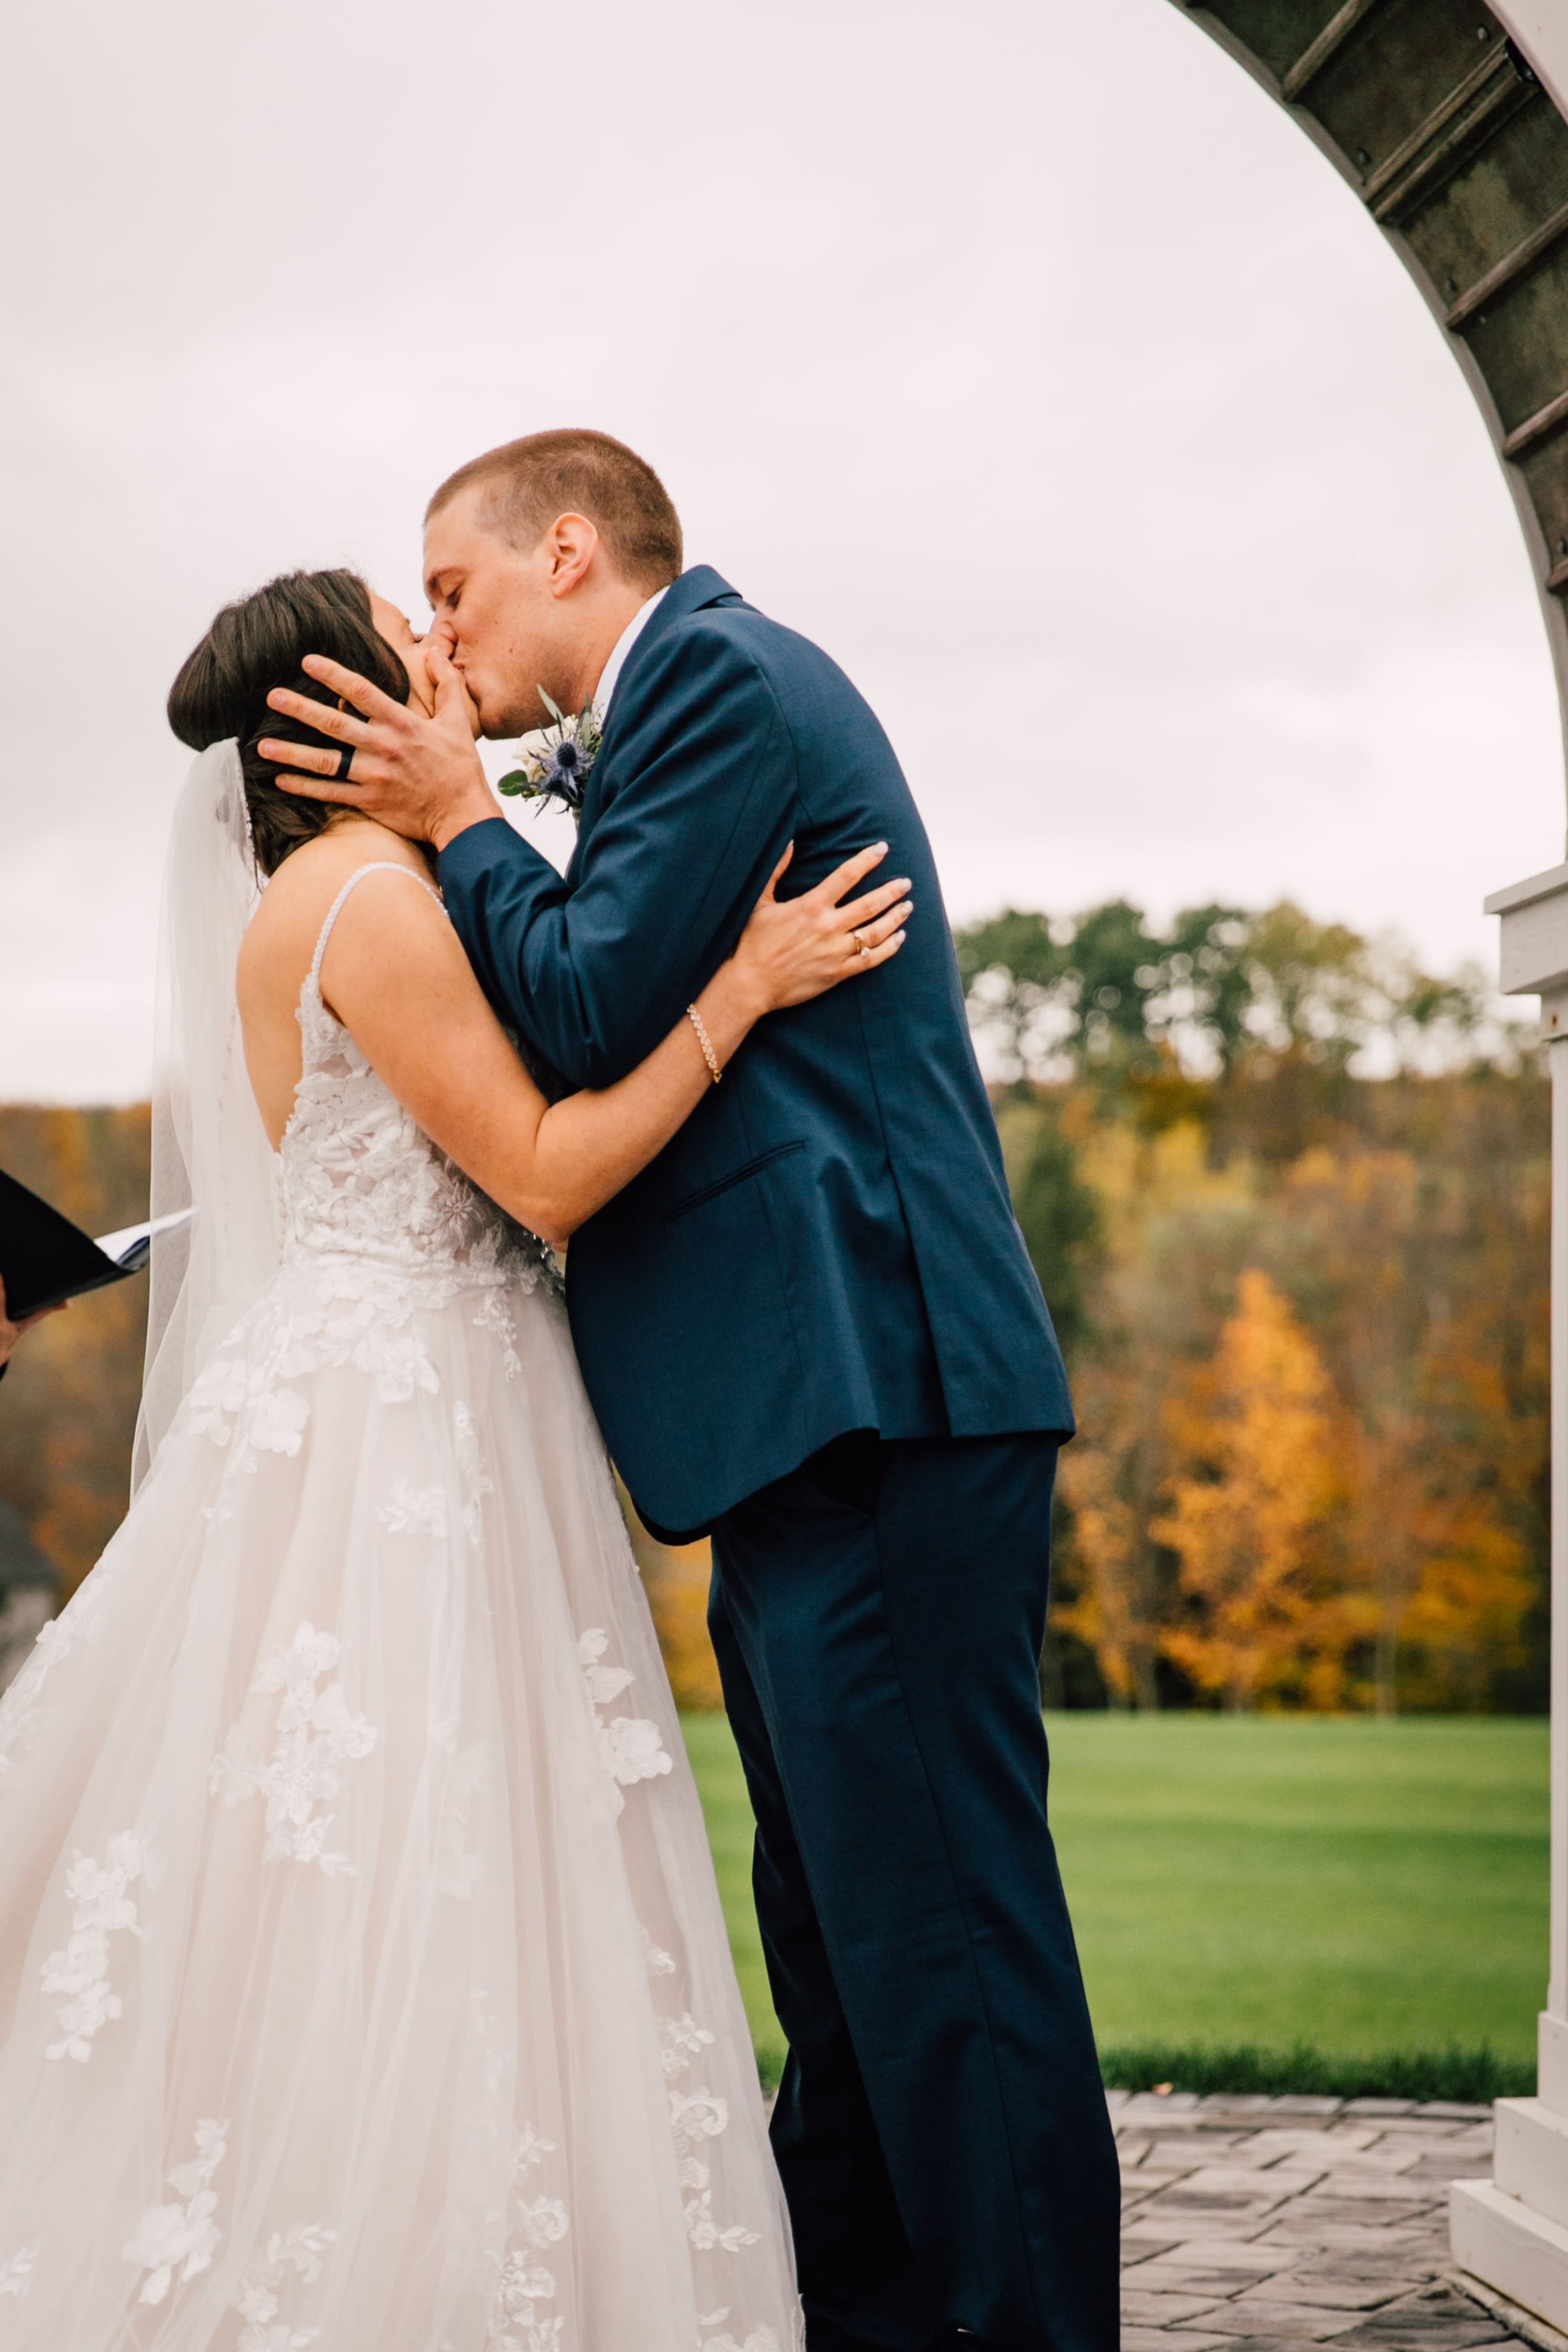  the bride and groom share their first kiss during their outdoor fall wedding 